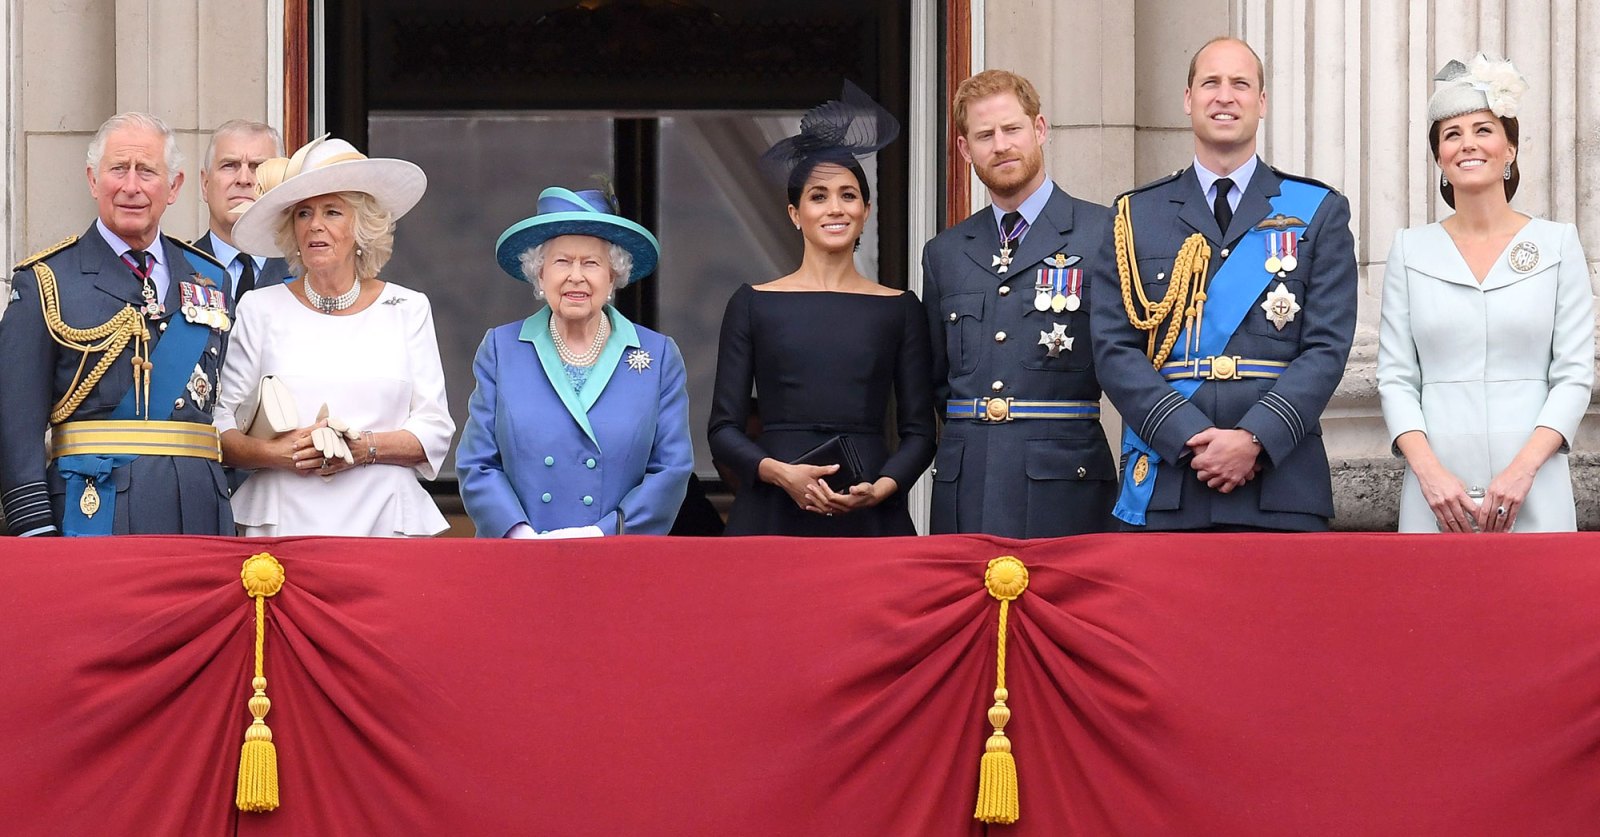 Prince Charles, Prince Andrew, Camilla Duchess of Cornwall, Queen Elizabeth II, Meghan Duchess of Sussex, Prince Harry, Prince William, Catherine Duchess of Cambridge How the Royal Family Has Been Affected by Coronavirus